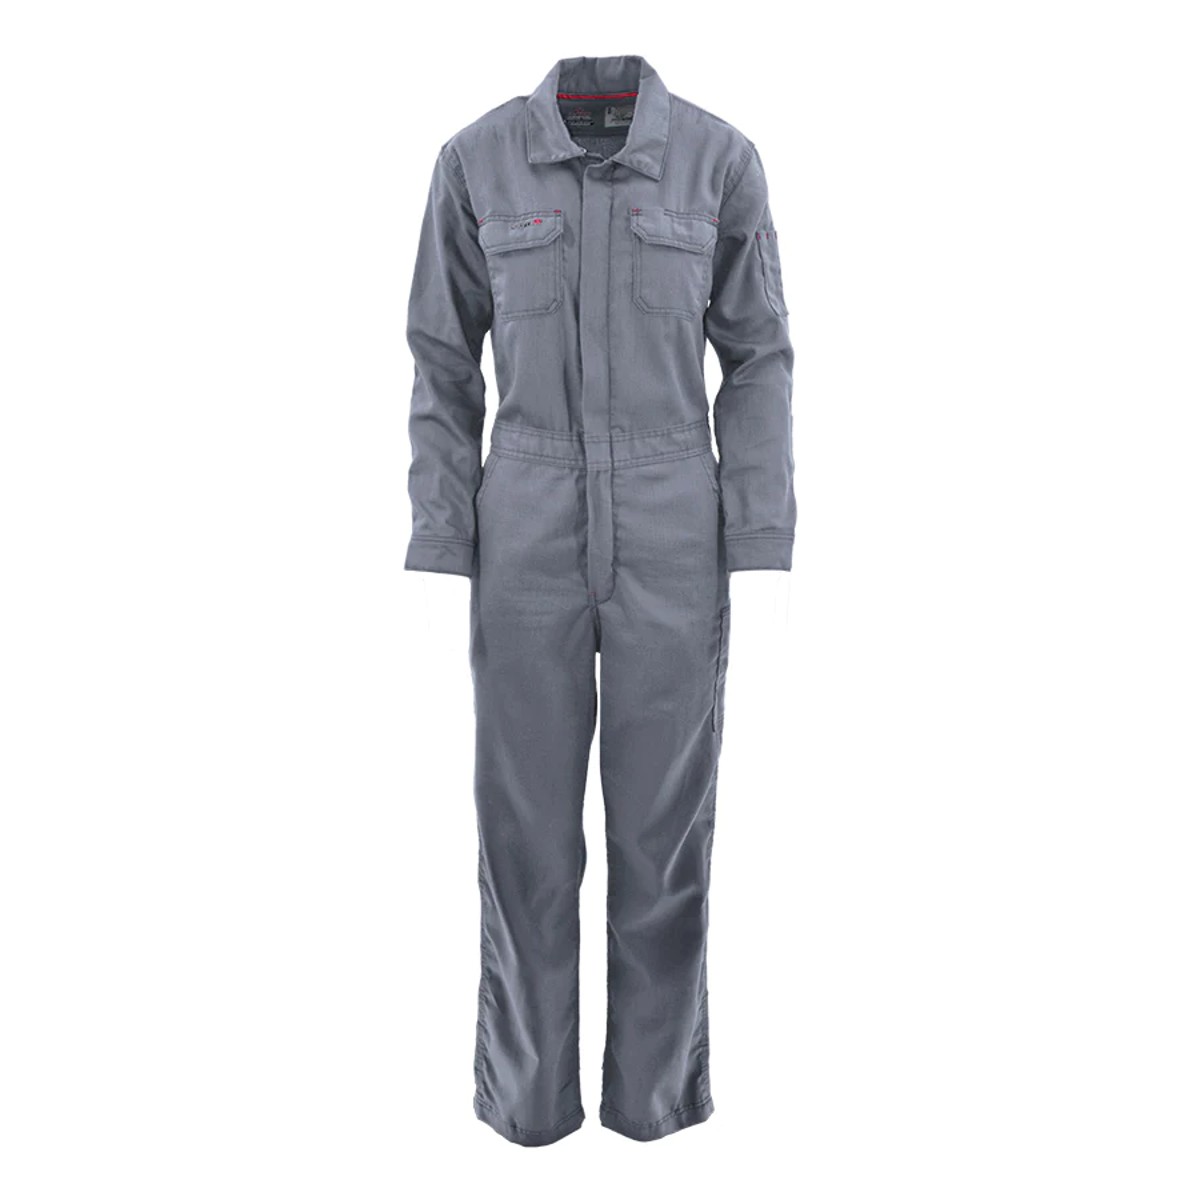 LAPCO Ladies FR Modern Coverall in Gray